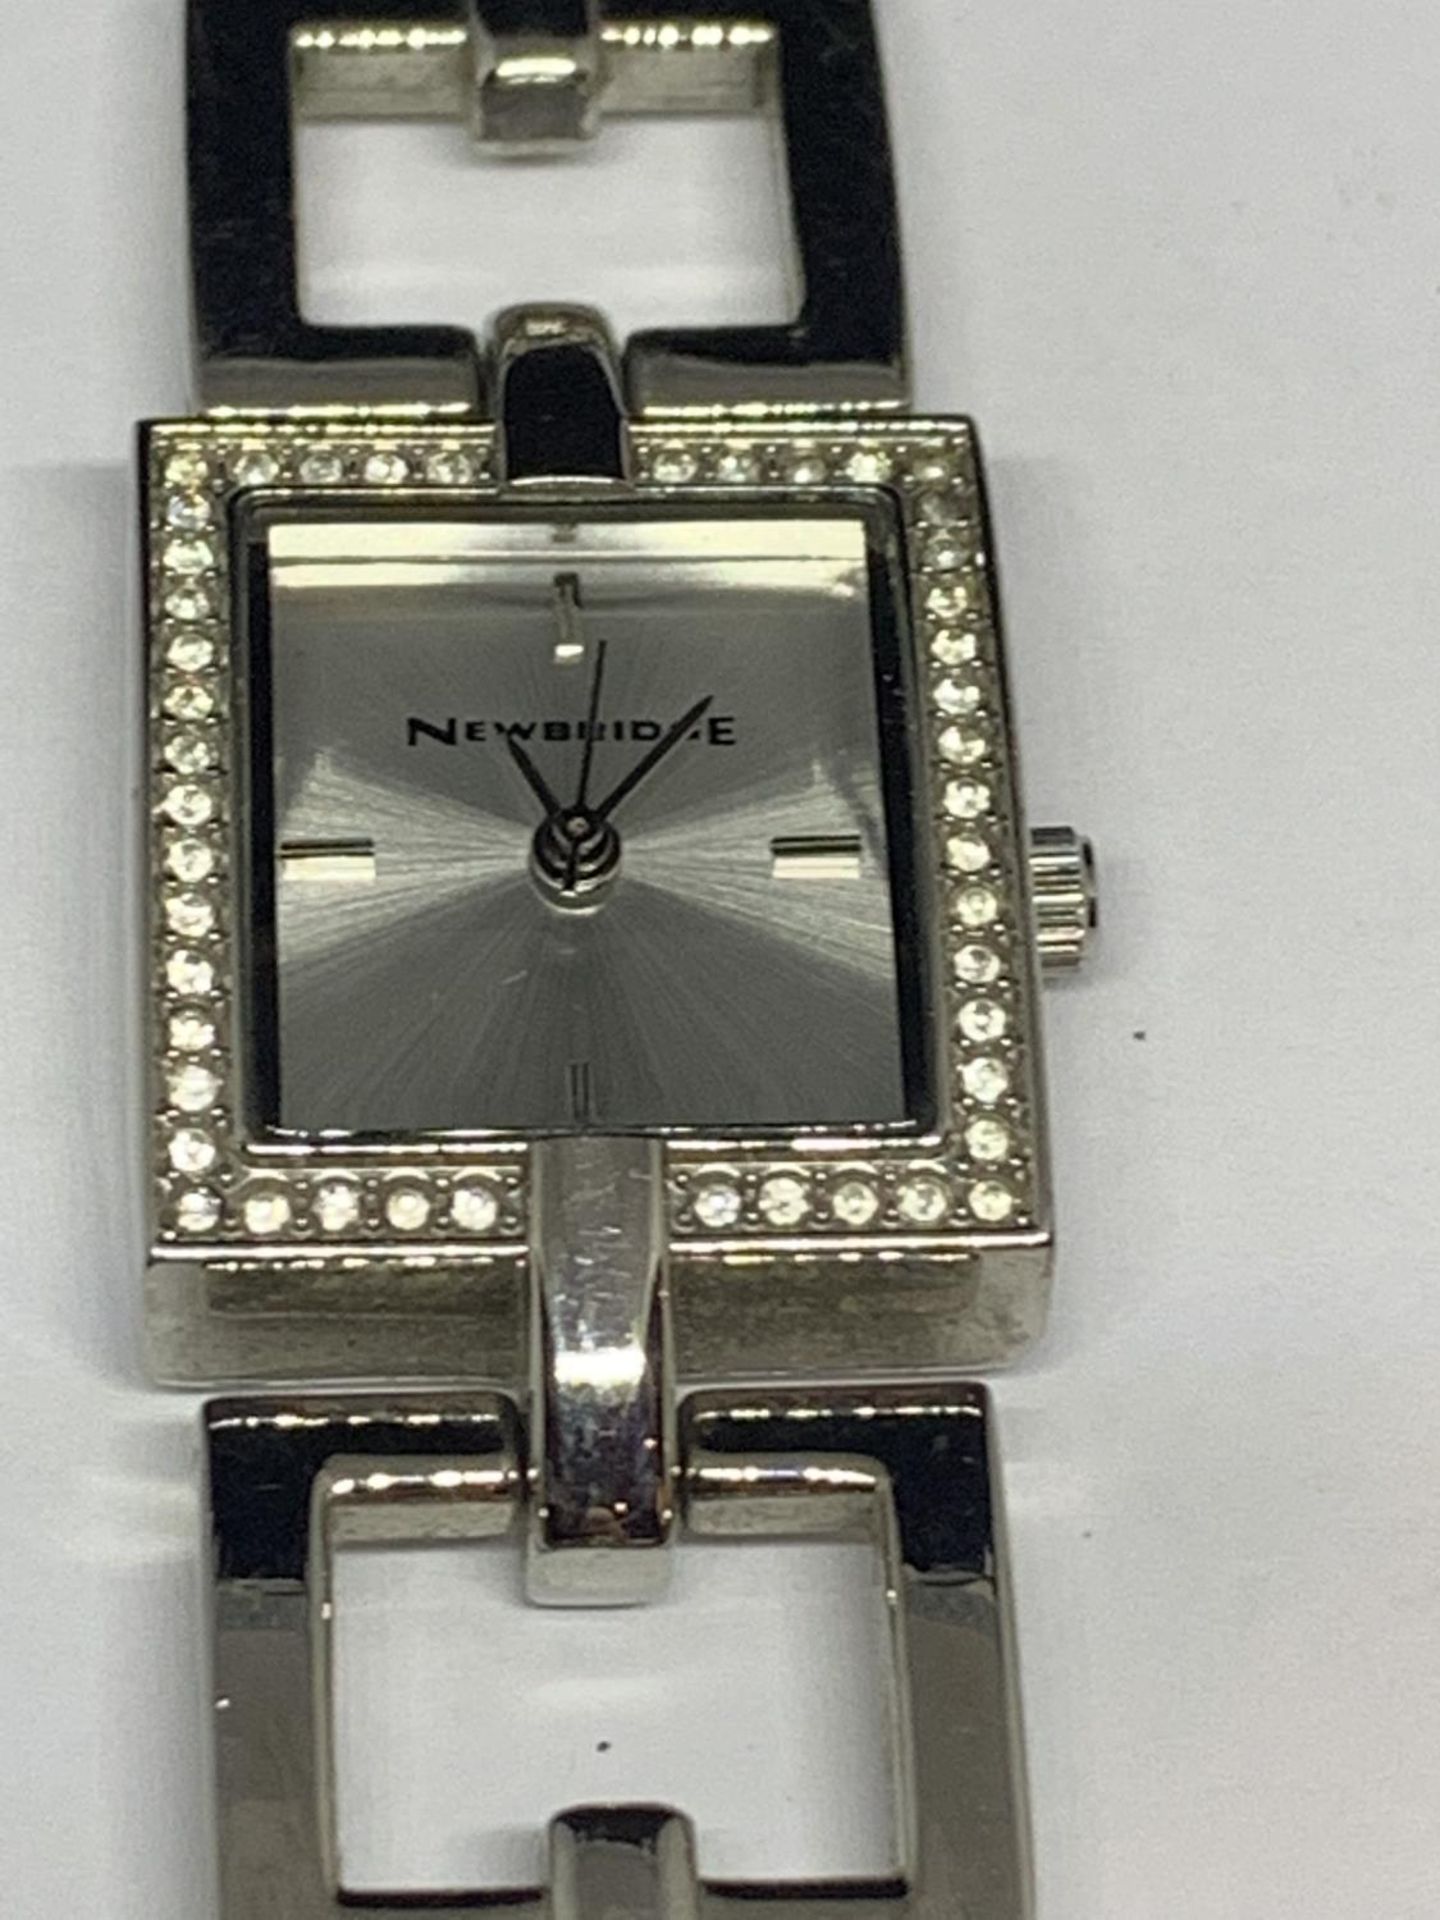 TWO DECORATIVE WRIST WATCHES WITH CLEAR STONE DECORATION ONE WITH A RECTANGULAR FACE AND A - Image 4 of 4